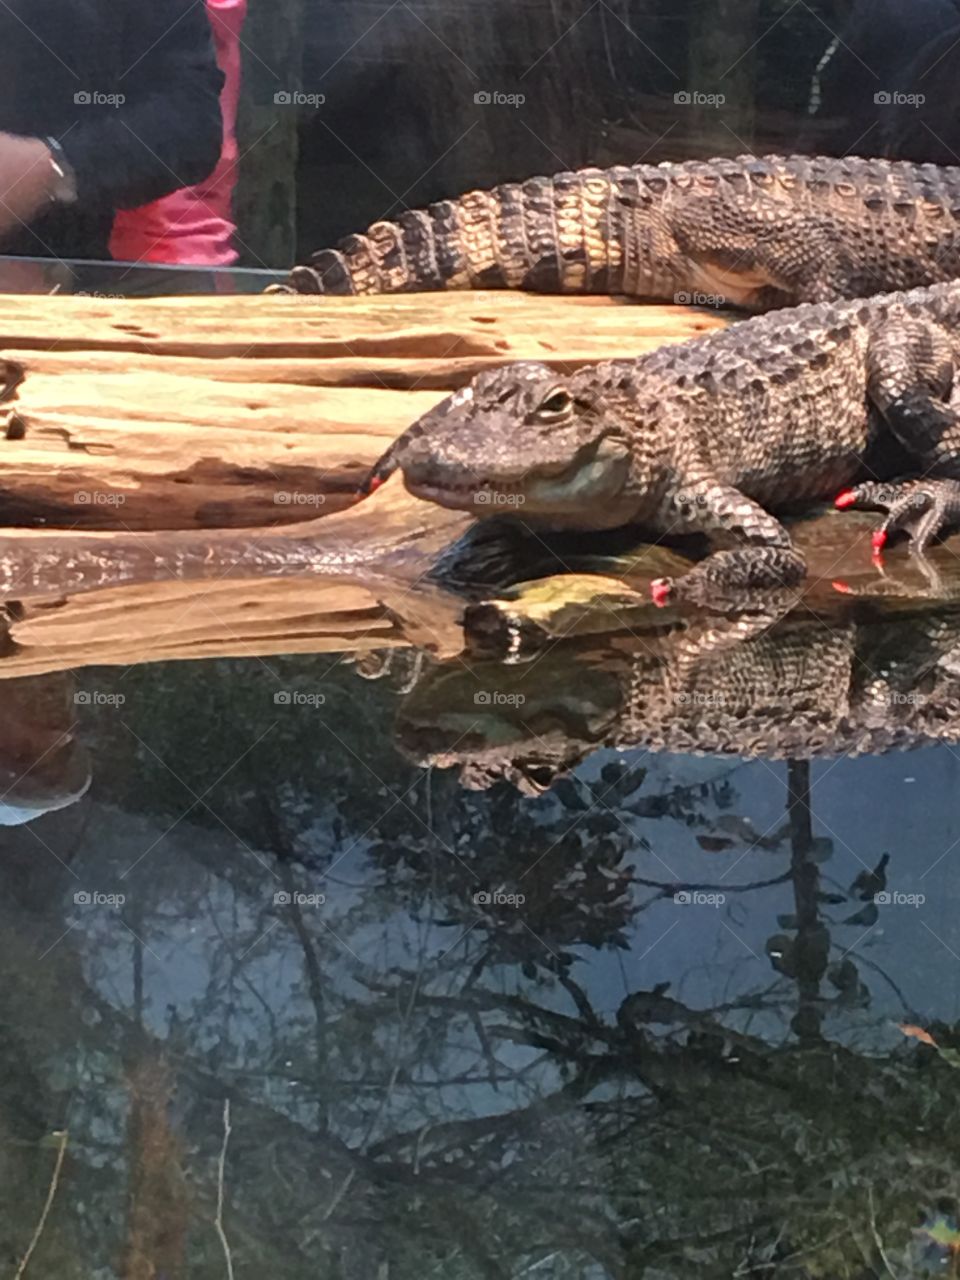 Another perspective view of the alligator at the Aquarium. It’s got little rubber pink nails on its feet. 